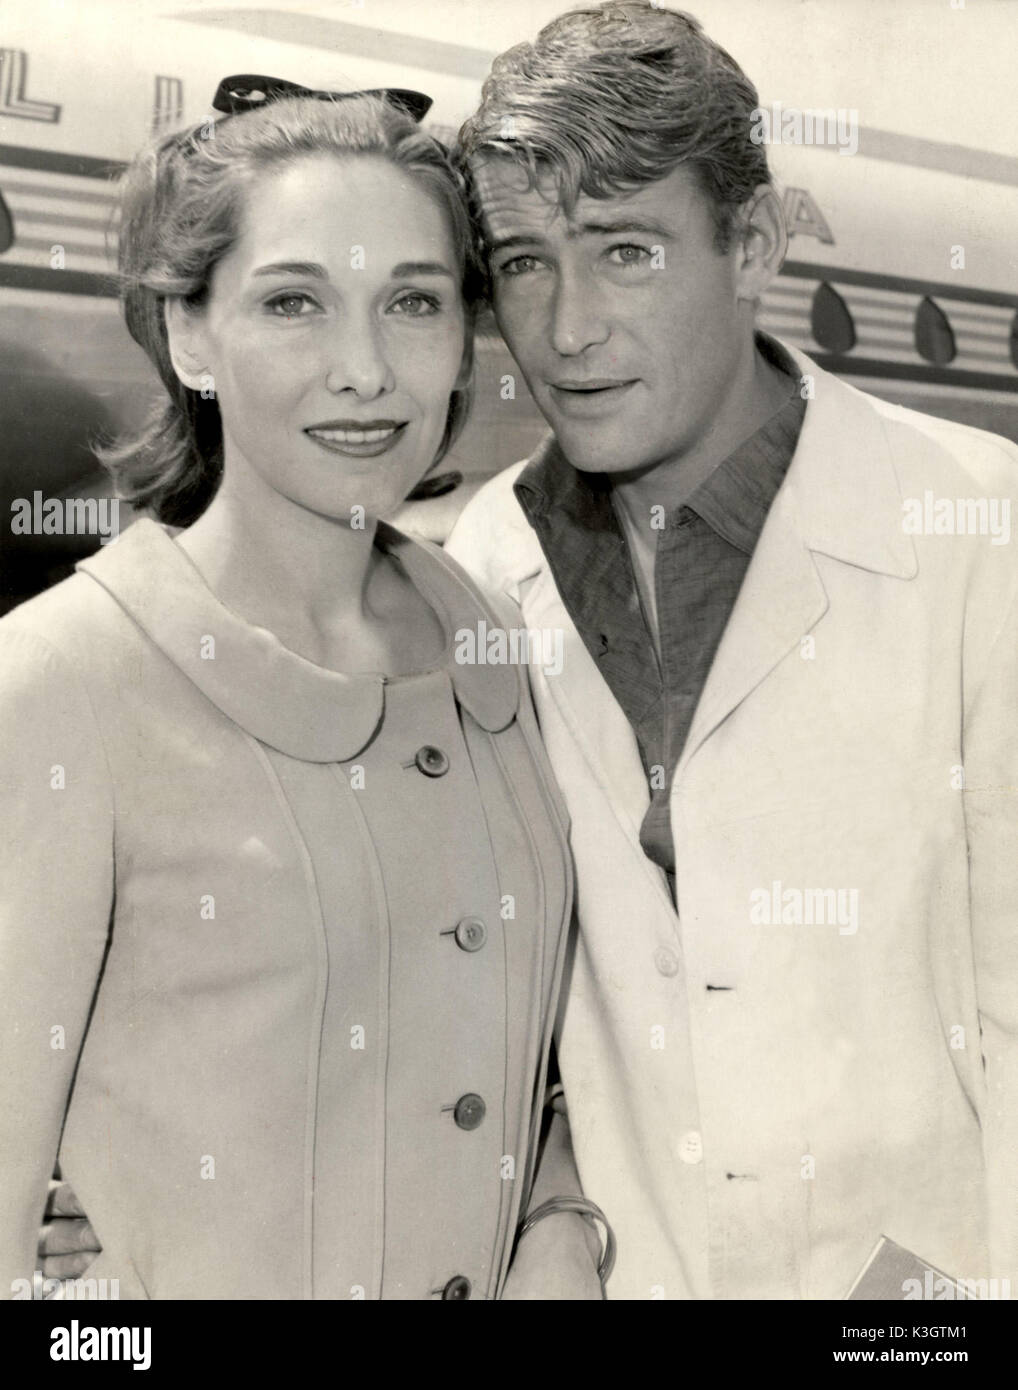 SIAN PHILLIPS and PETER O'TOOLE   [ 'Actor Peter O'Toole and his wife Sian leave London Airport for a few days holiday in Rome. I feel like having a change from England  said Peter who is currently working on the film 'LORD JIM'.  May 17, 1964]    [The couple were married from 1959 - 1979] Stock Photo